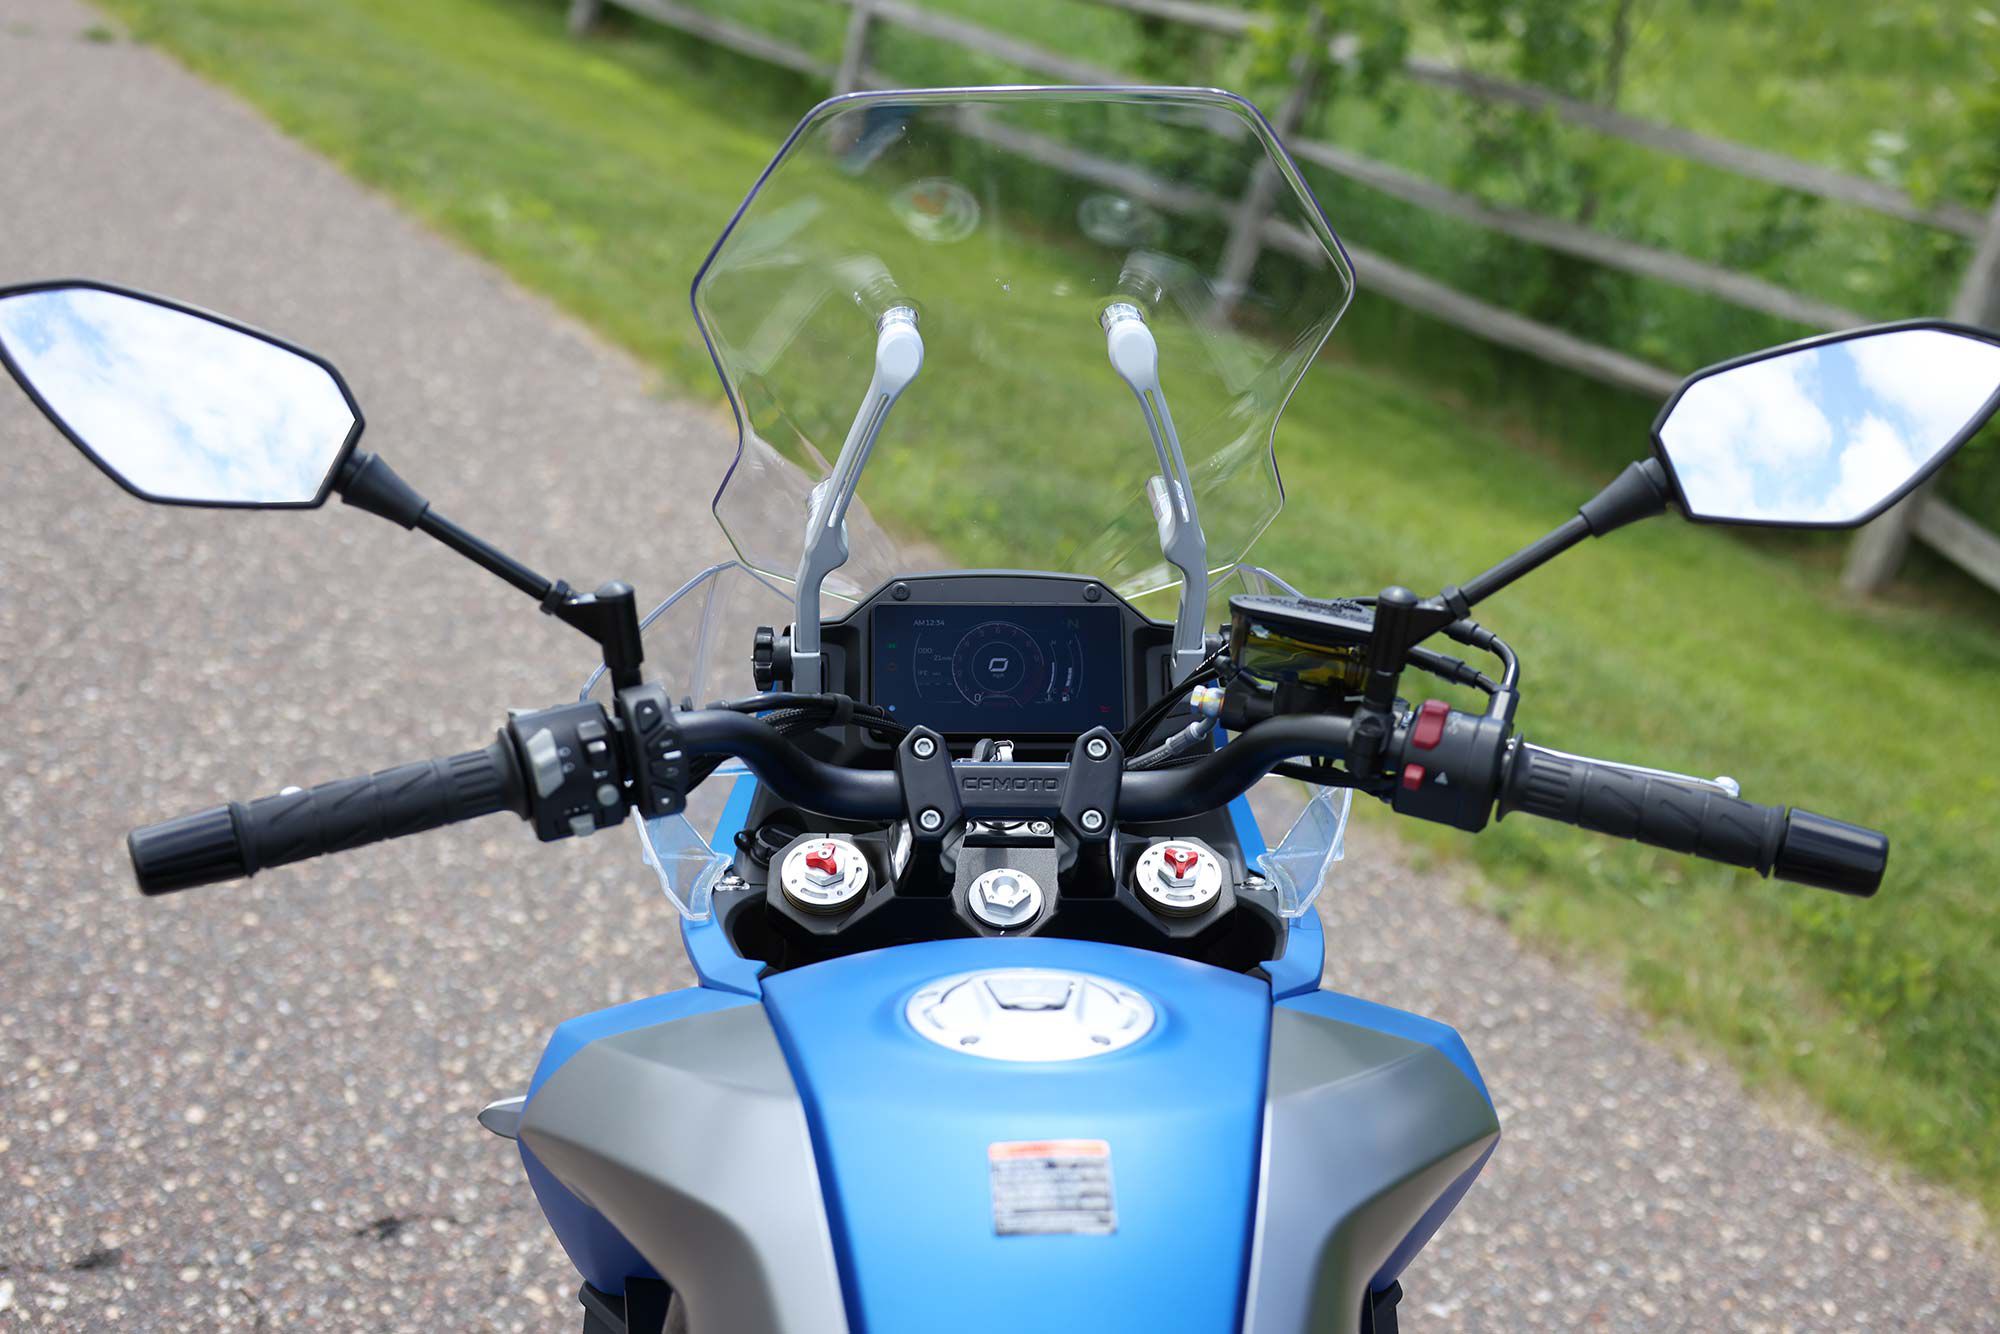 The windscreen is adjustable and provides great wind protection for long-distance touring, though it can trap heat near the cockpit.